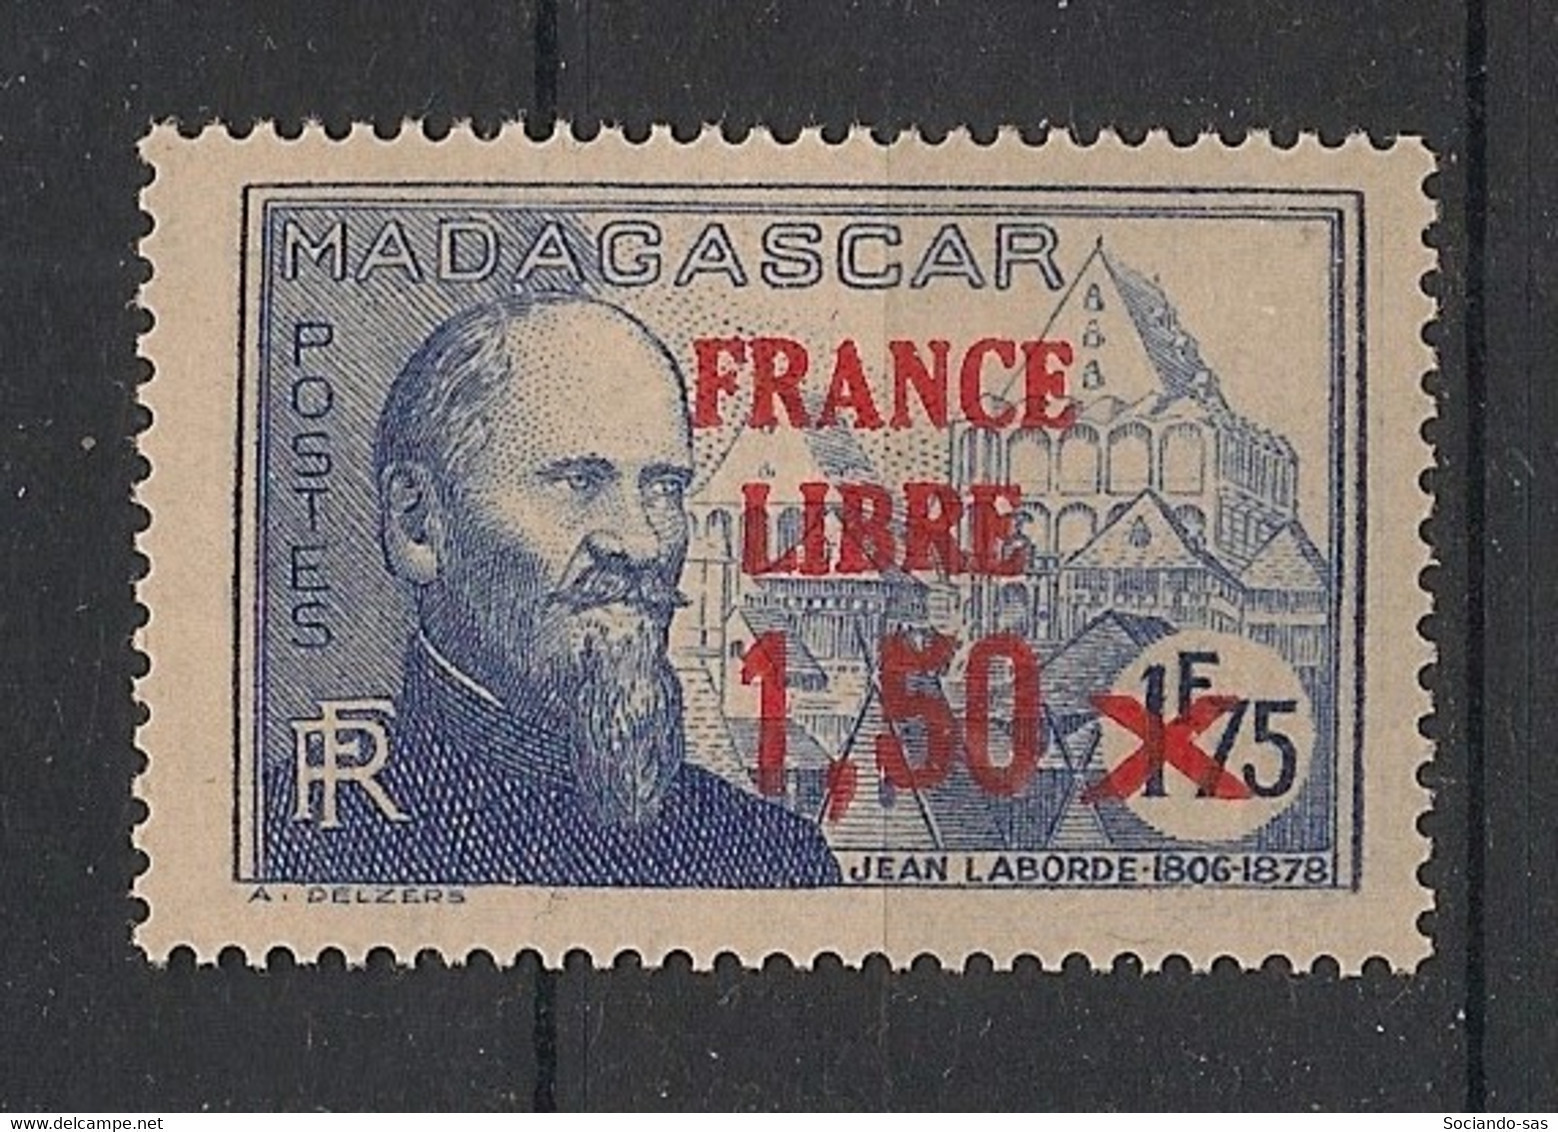 MADAGASCAR - 1942 - N°YT. 263 - France Libre 1f75 Sur 1f50 - Neuf Luxe ** / MNH / Postfrisch - Nuovi